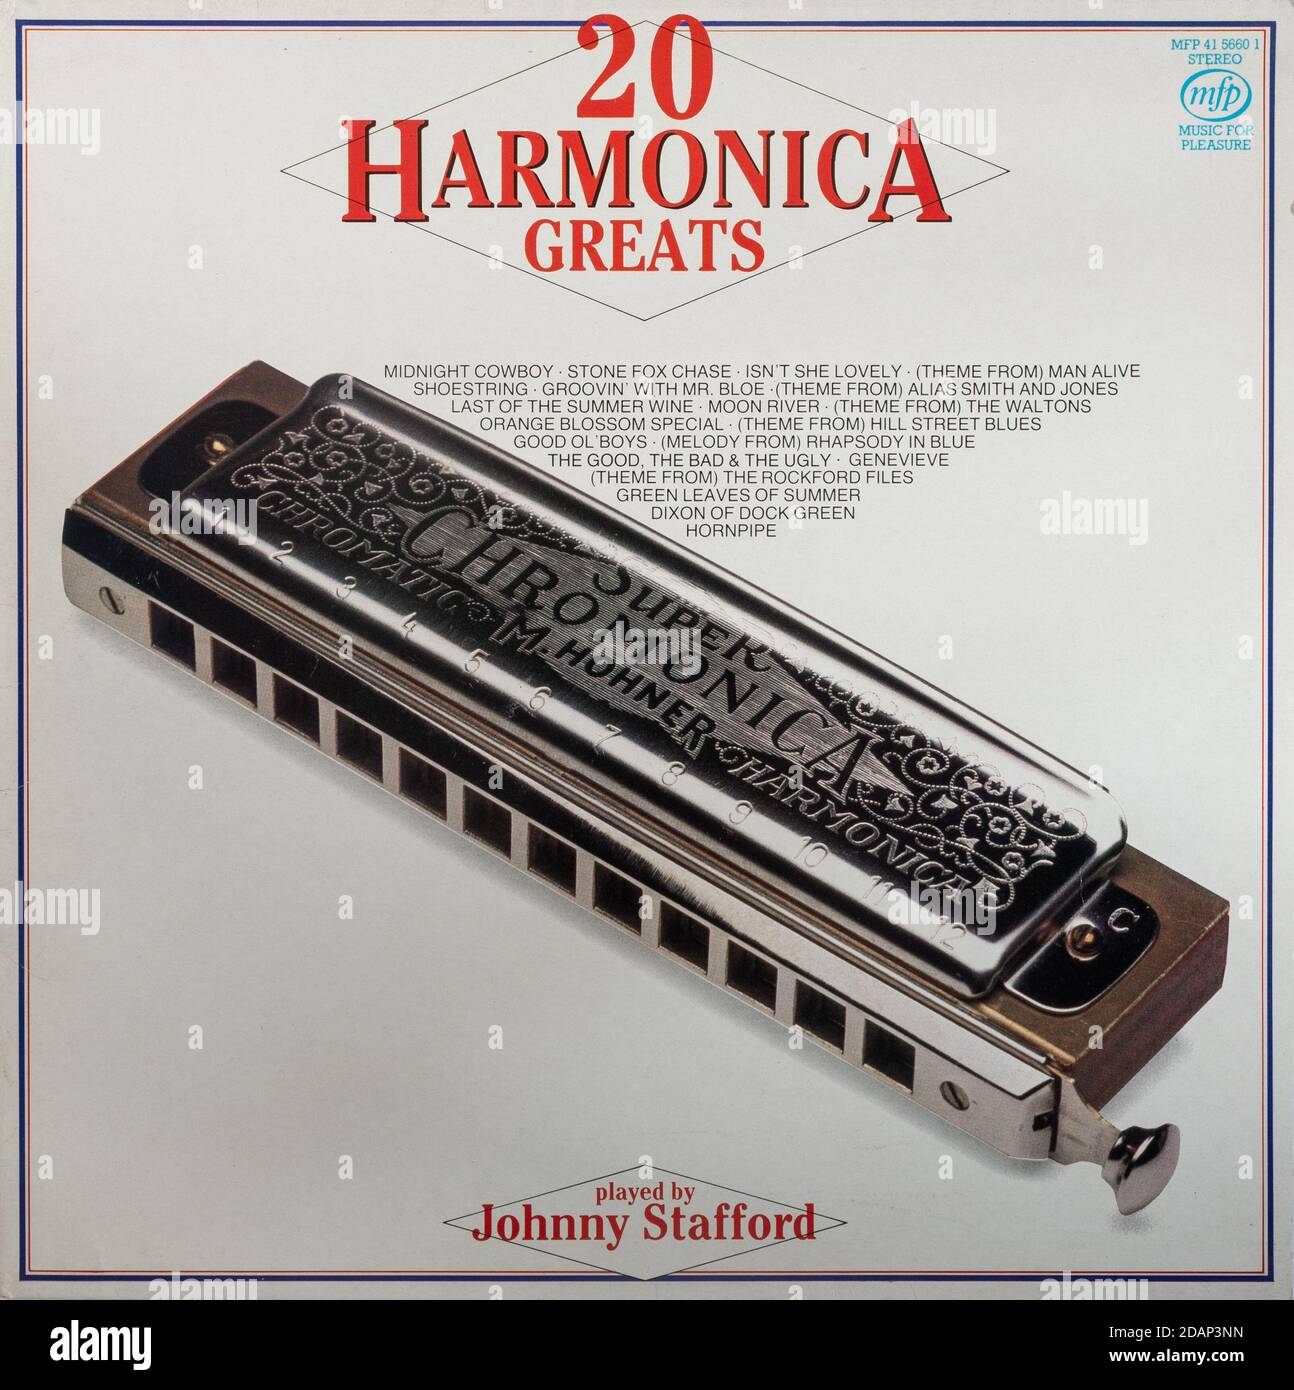 20 Harmonica Greats played by Johnny Stafford, vinyl LP record album cover Stock Photo